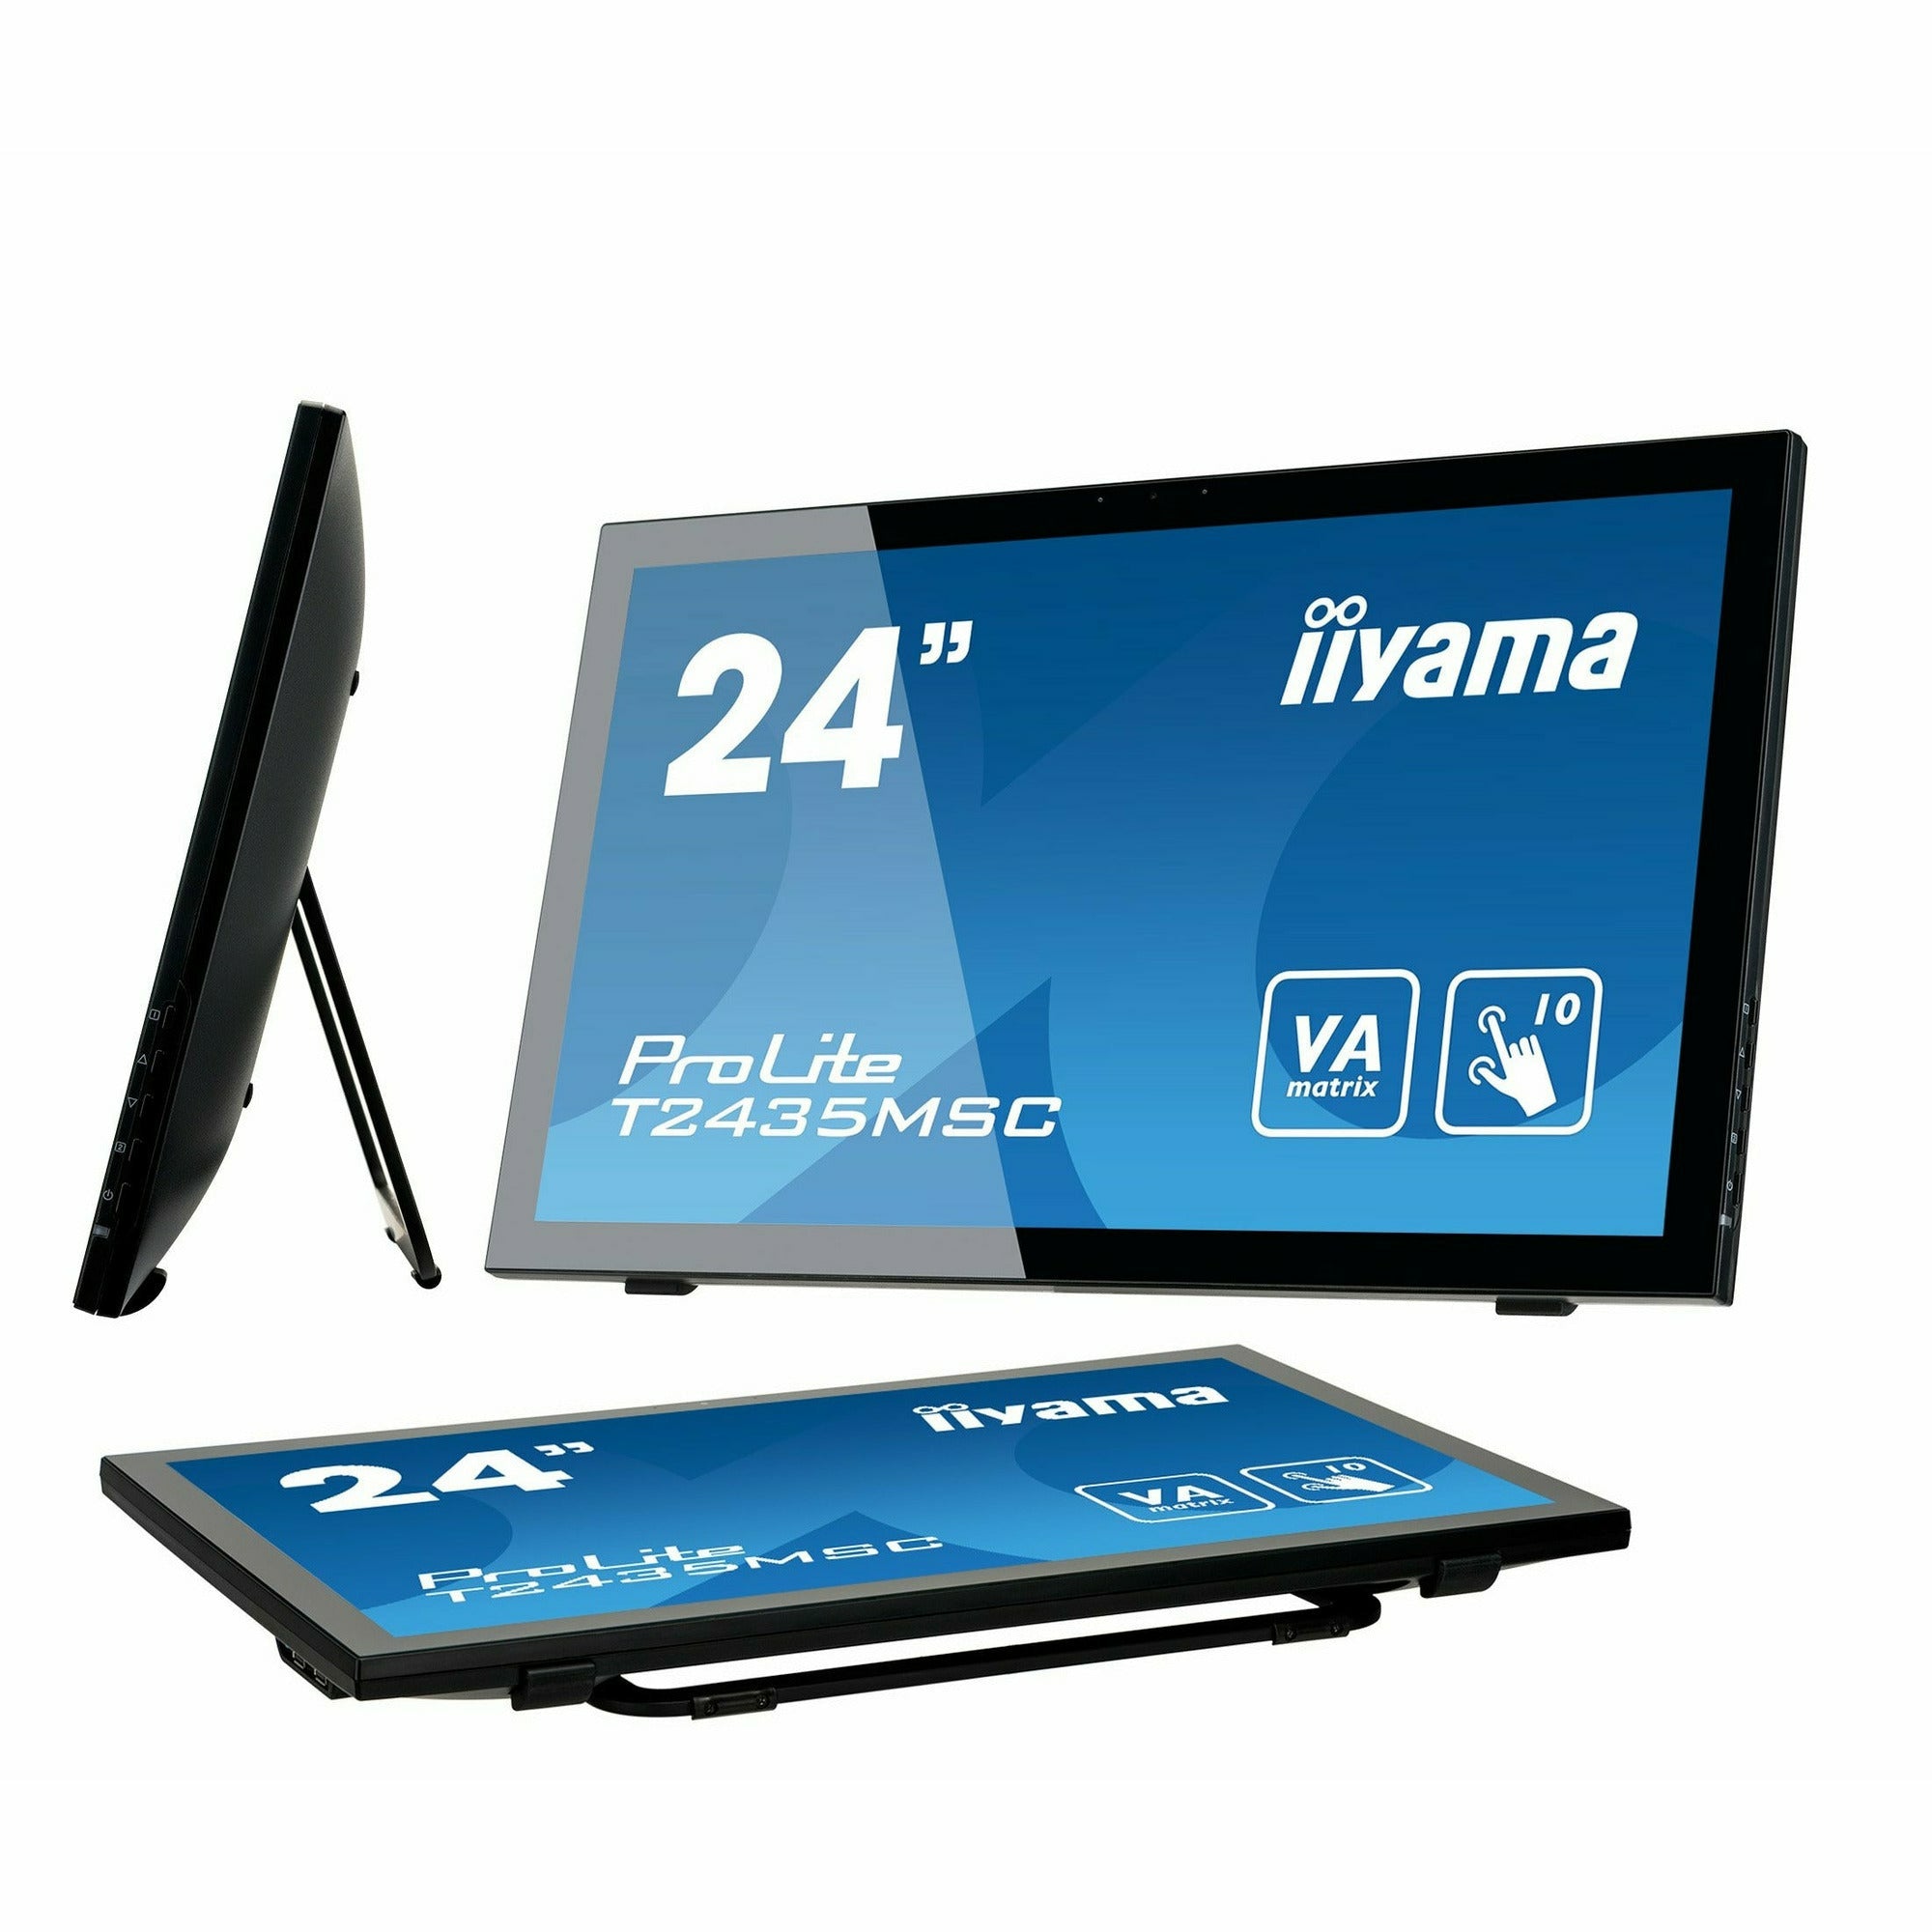 iiyama ProLite T2435MSC-B2 24" 10 pt Touch screen Display with Integrated Webcam